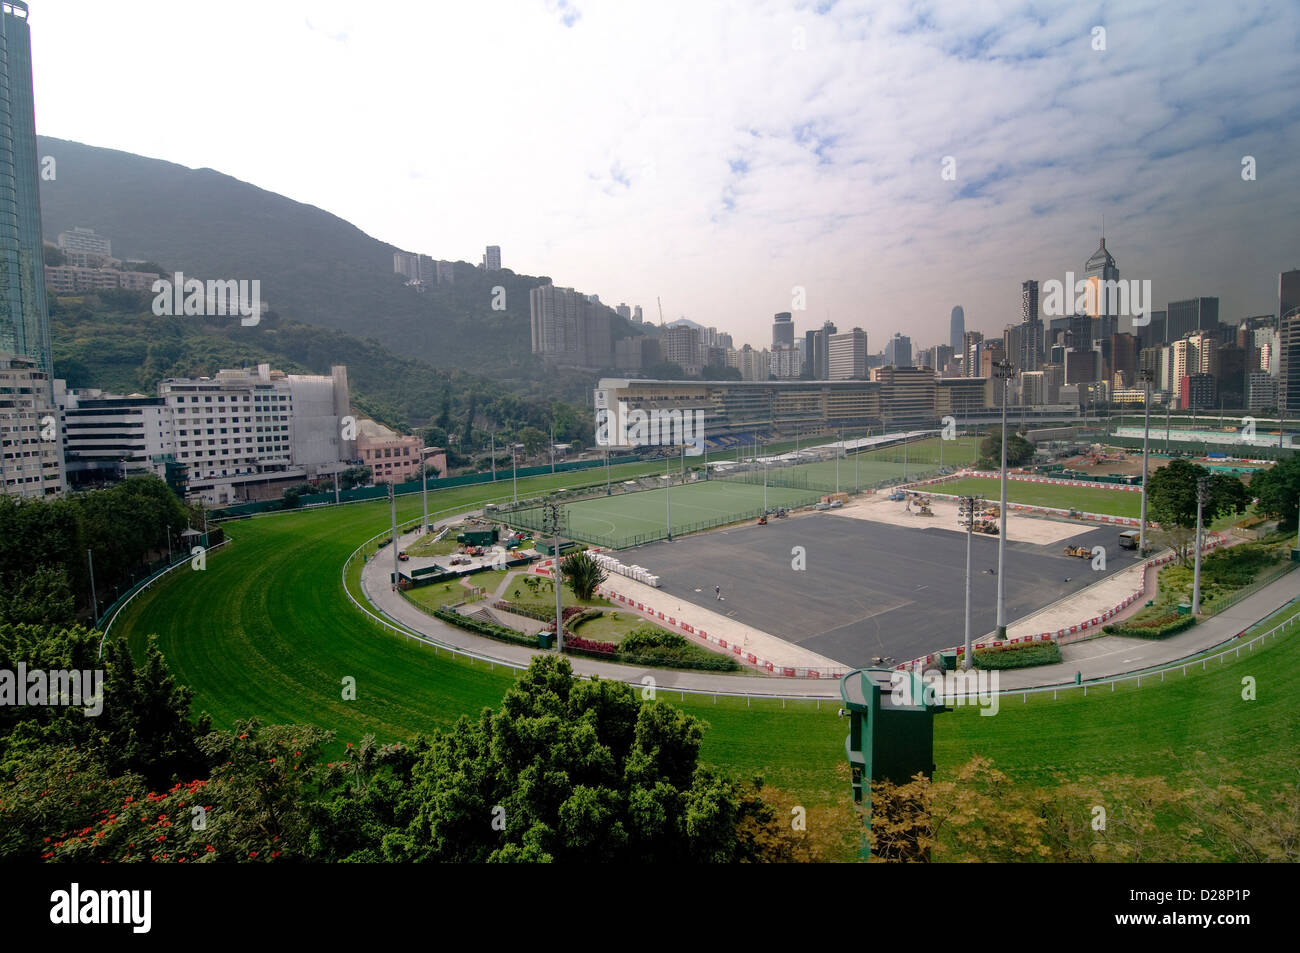 The Happy Valley racecourse in Hong Kong. Stock Photo